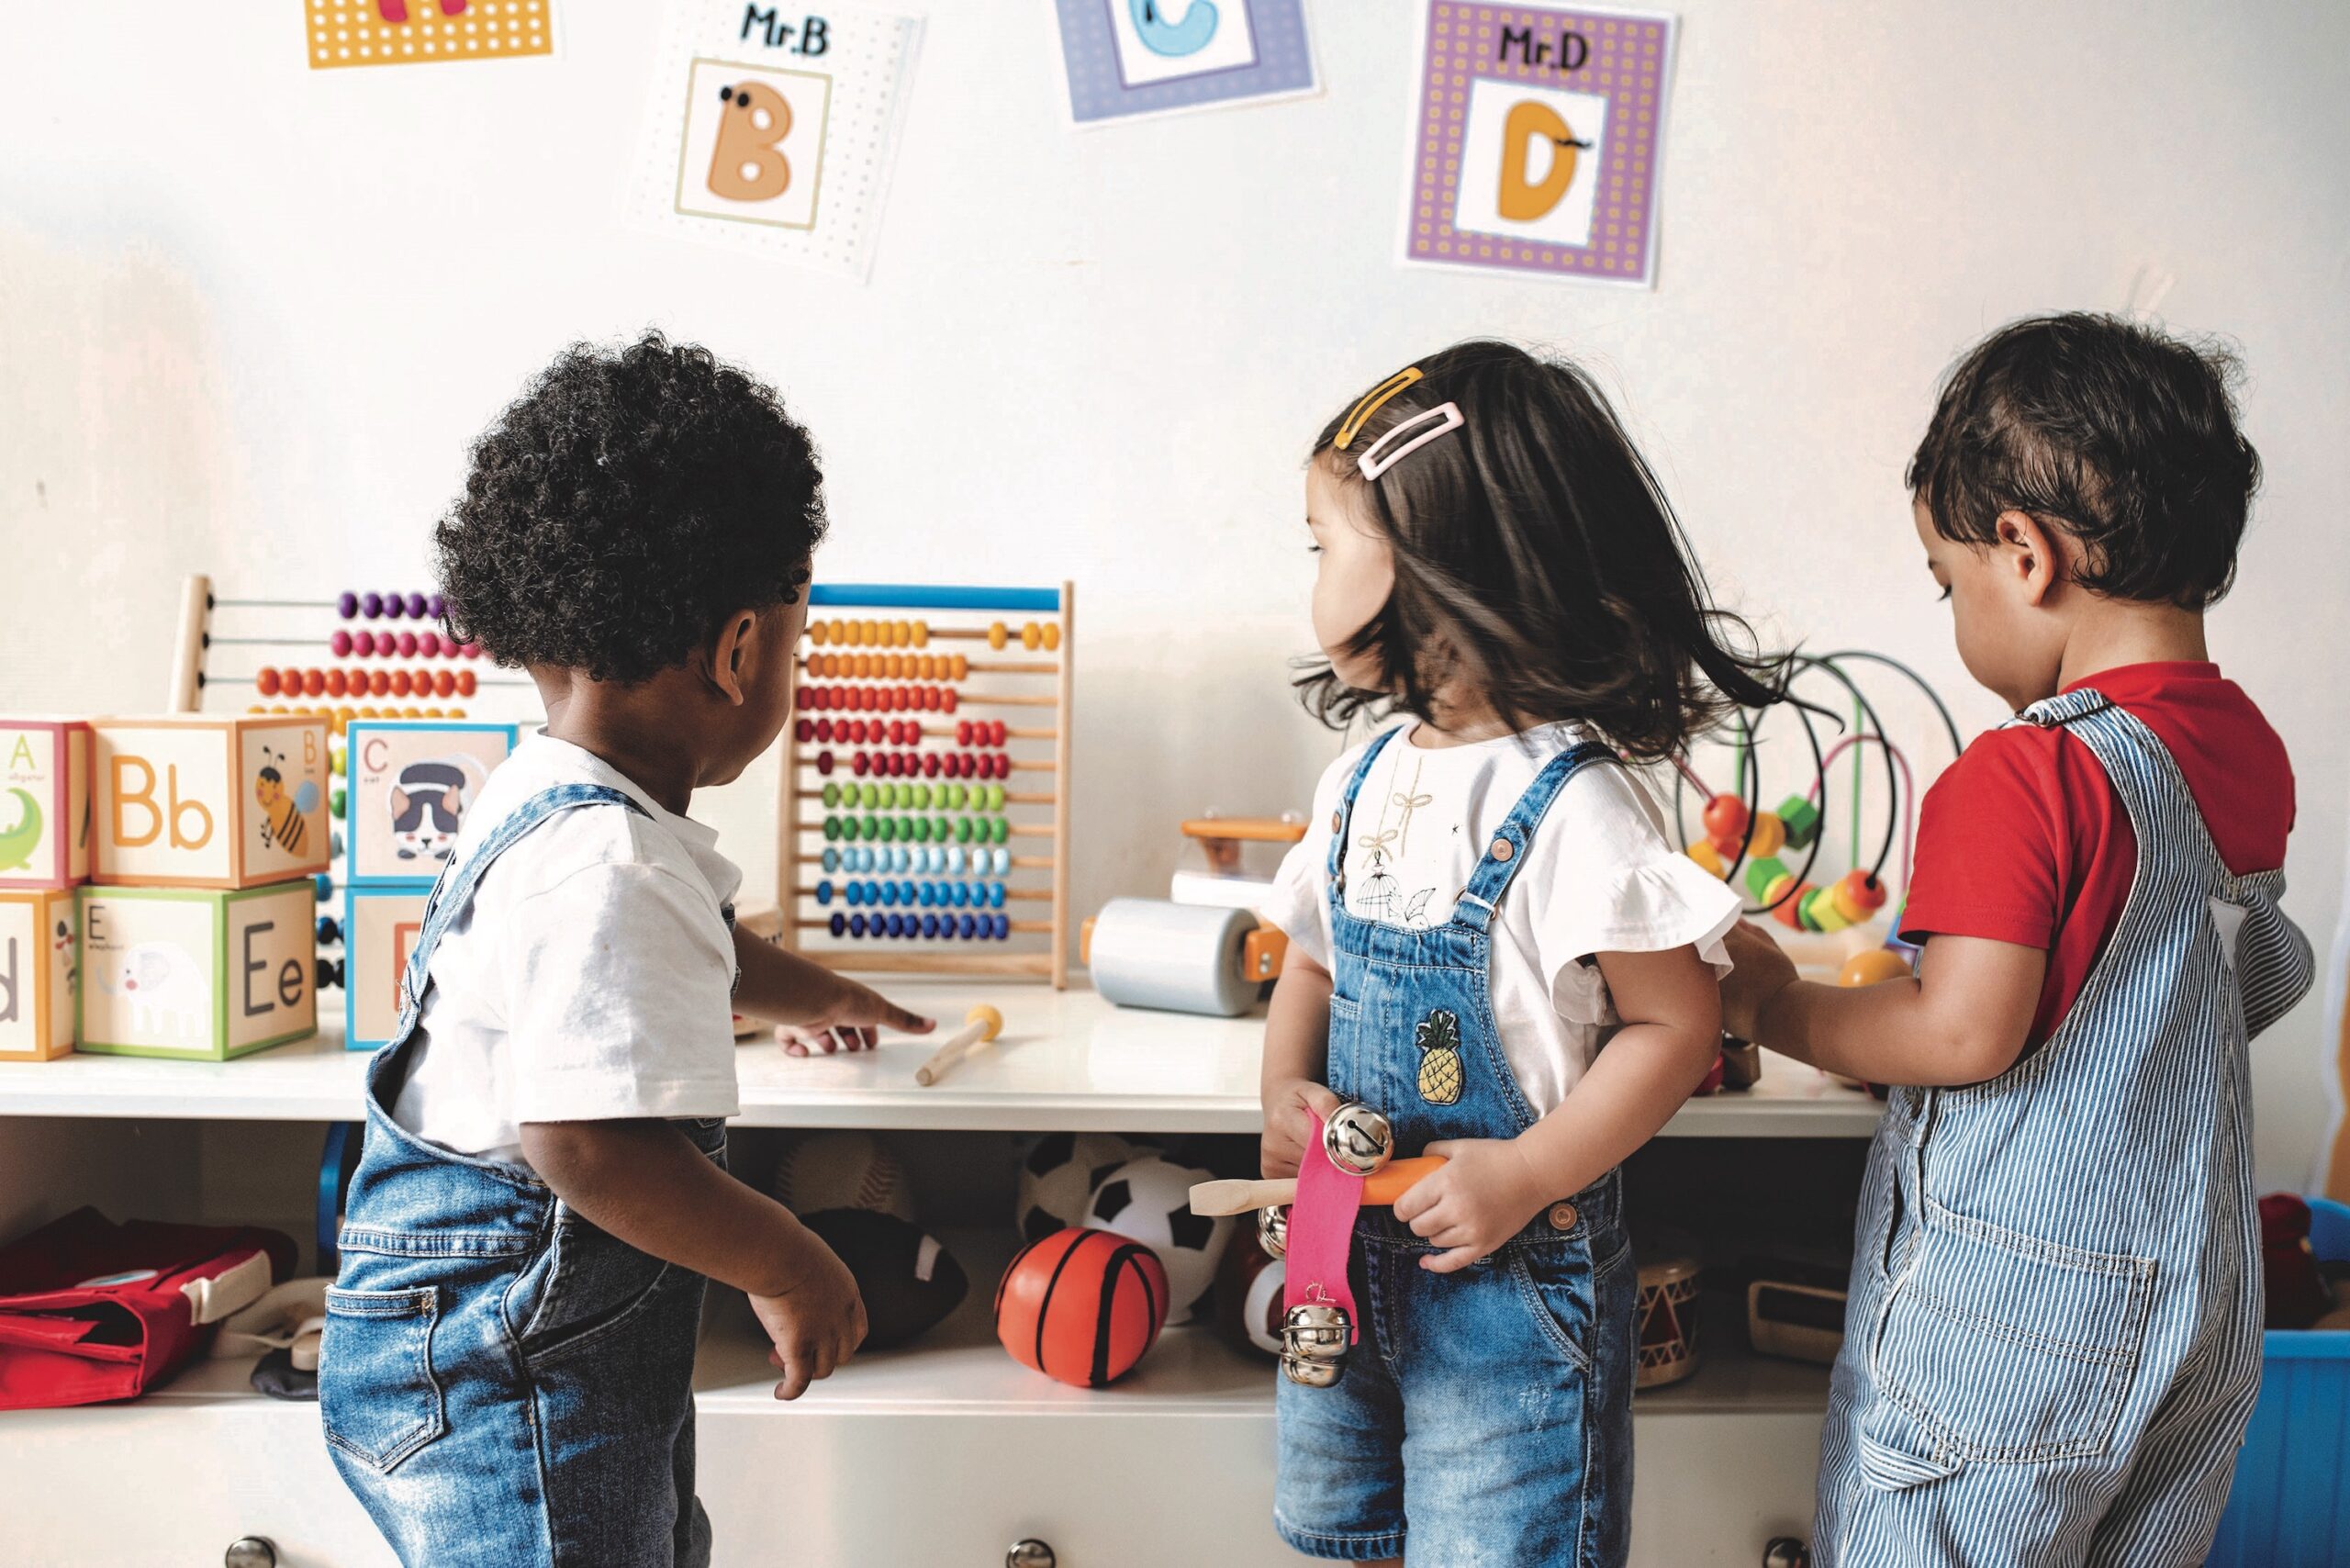 Three young children of light, medium, and dark skin tones play with toys at school.